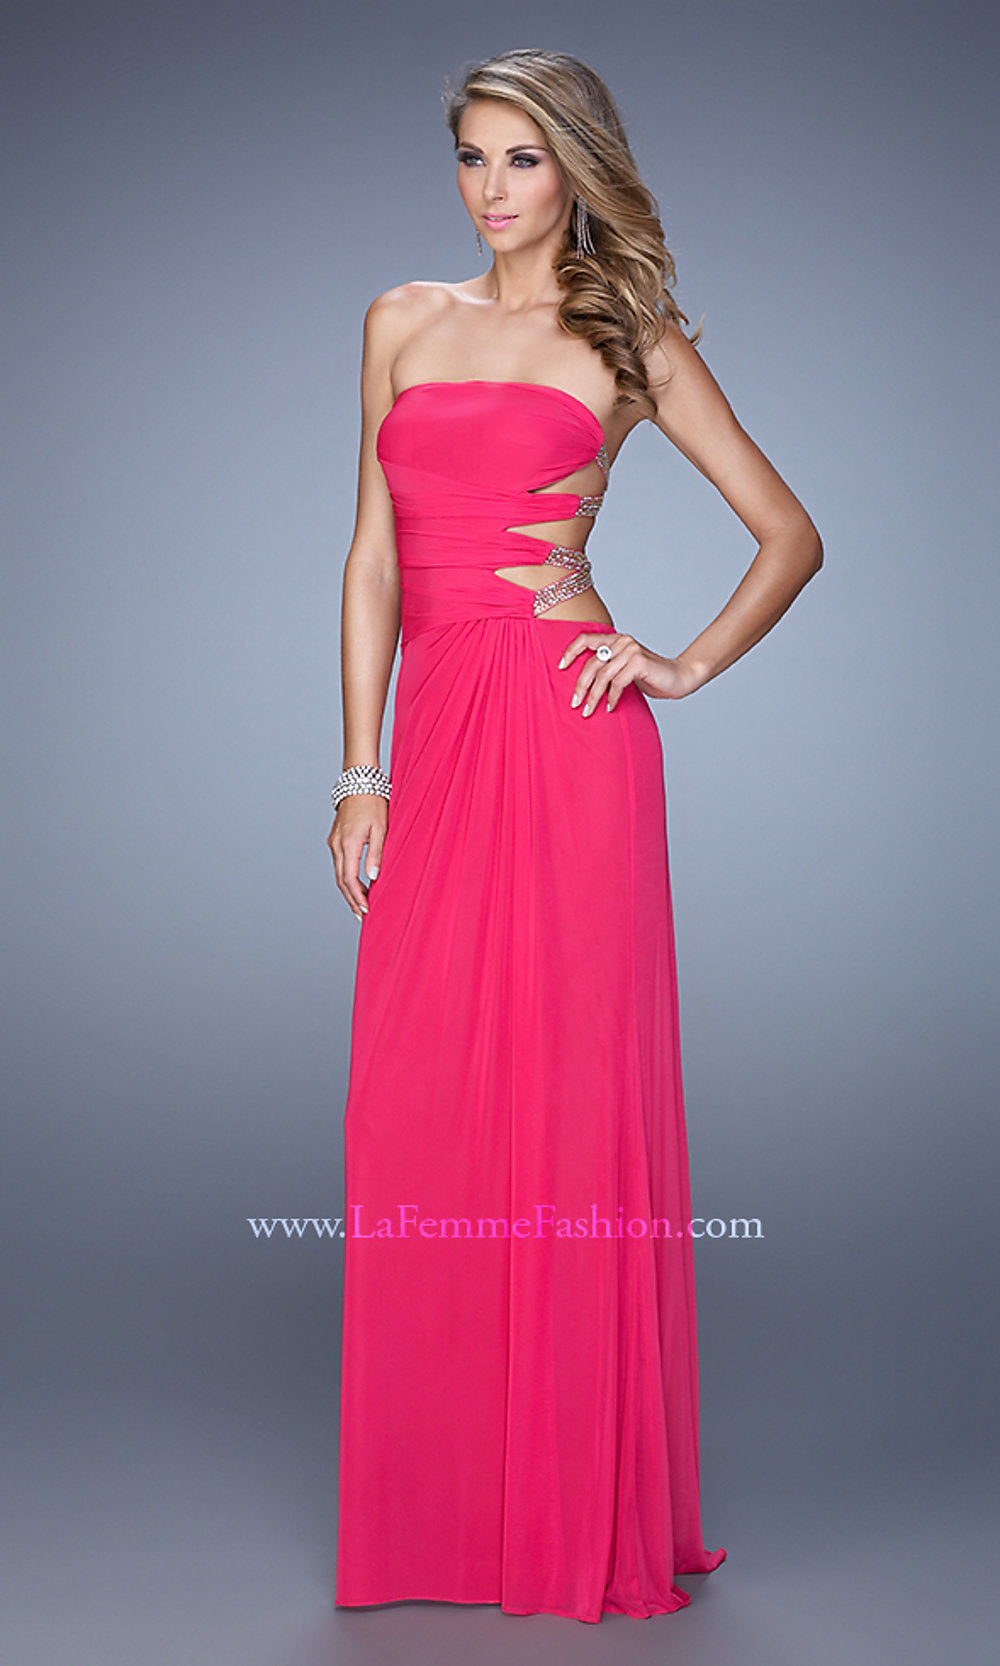  Strapless La Femme Prom Dress with Open Back